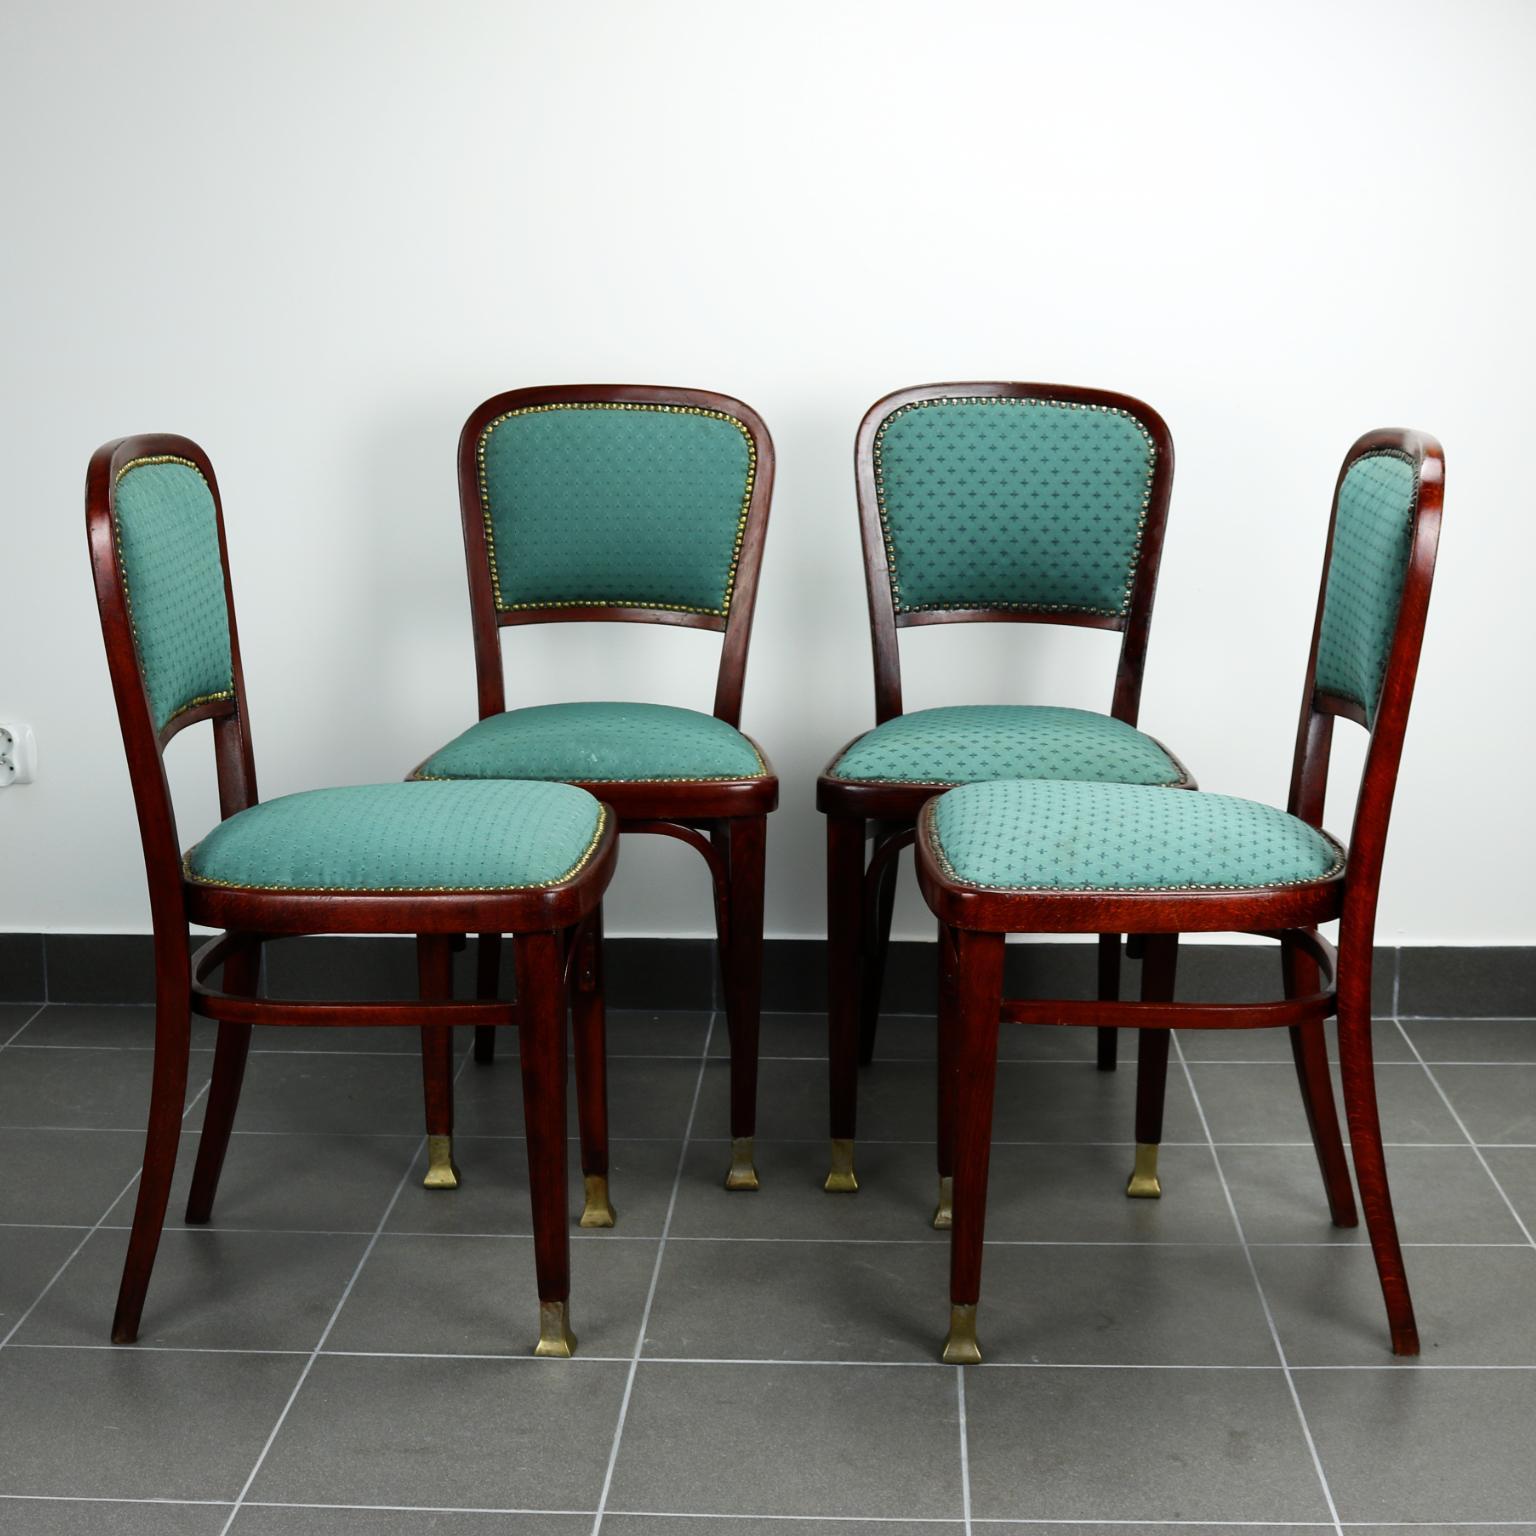 Austrian Set of four chairs by Marcel Kammerer for Thonet, circa 1910